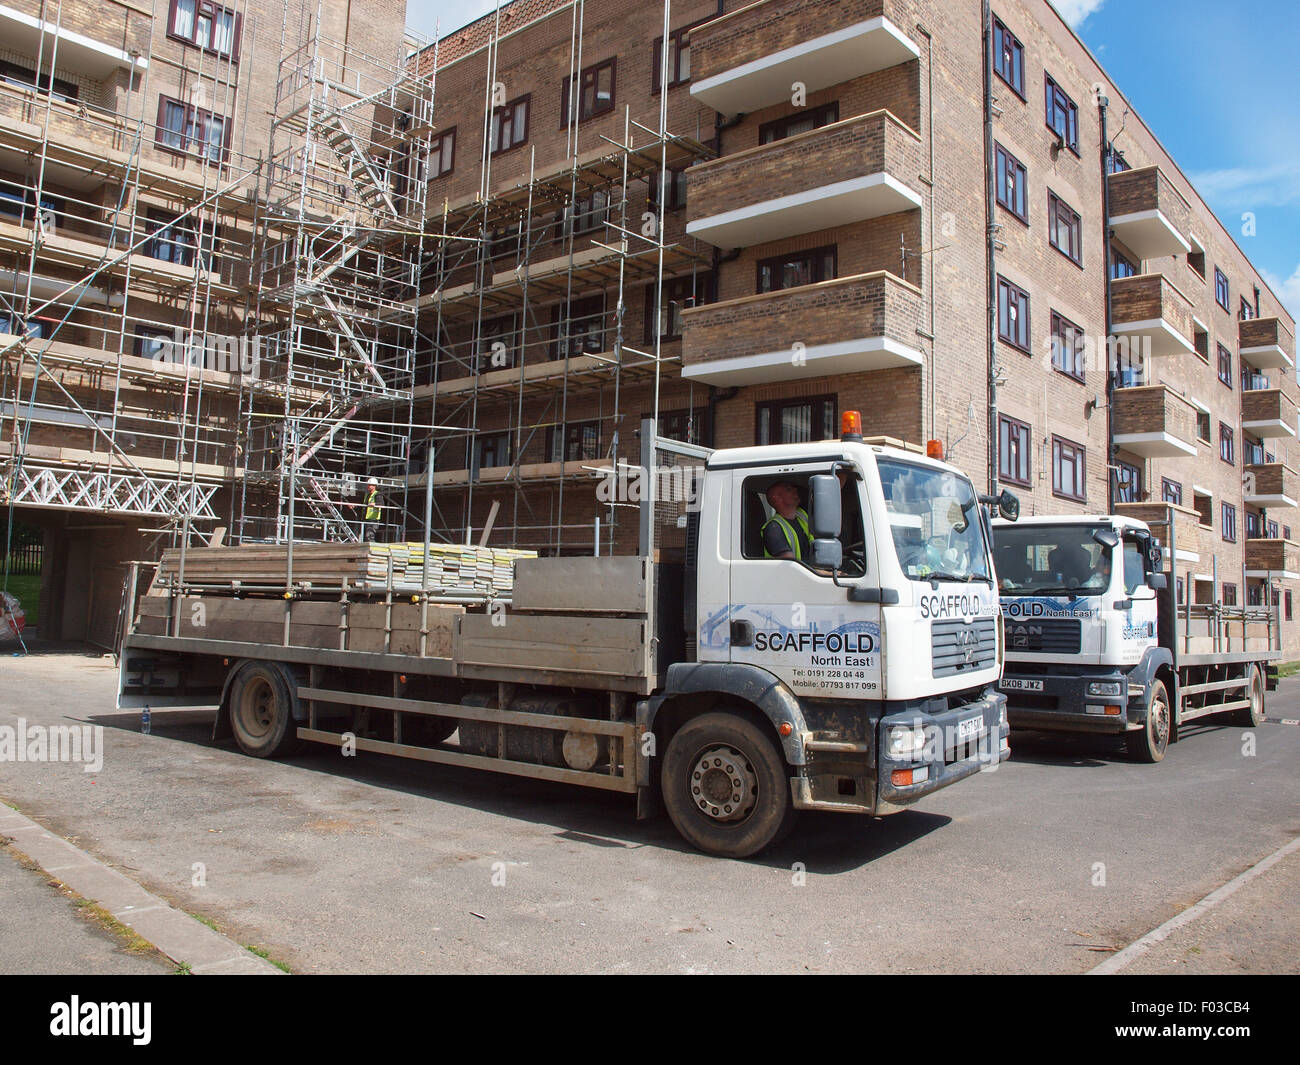 Two scaffolding trucks delivering tubular pipe steel to a listed building for renovation work of that building to be completed. Stock Photo